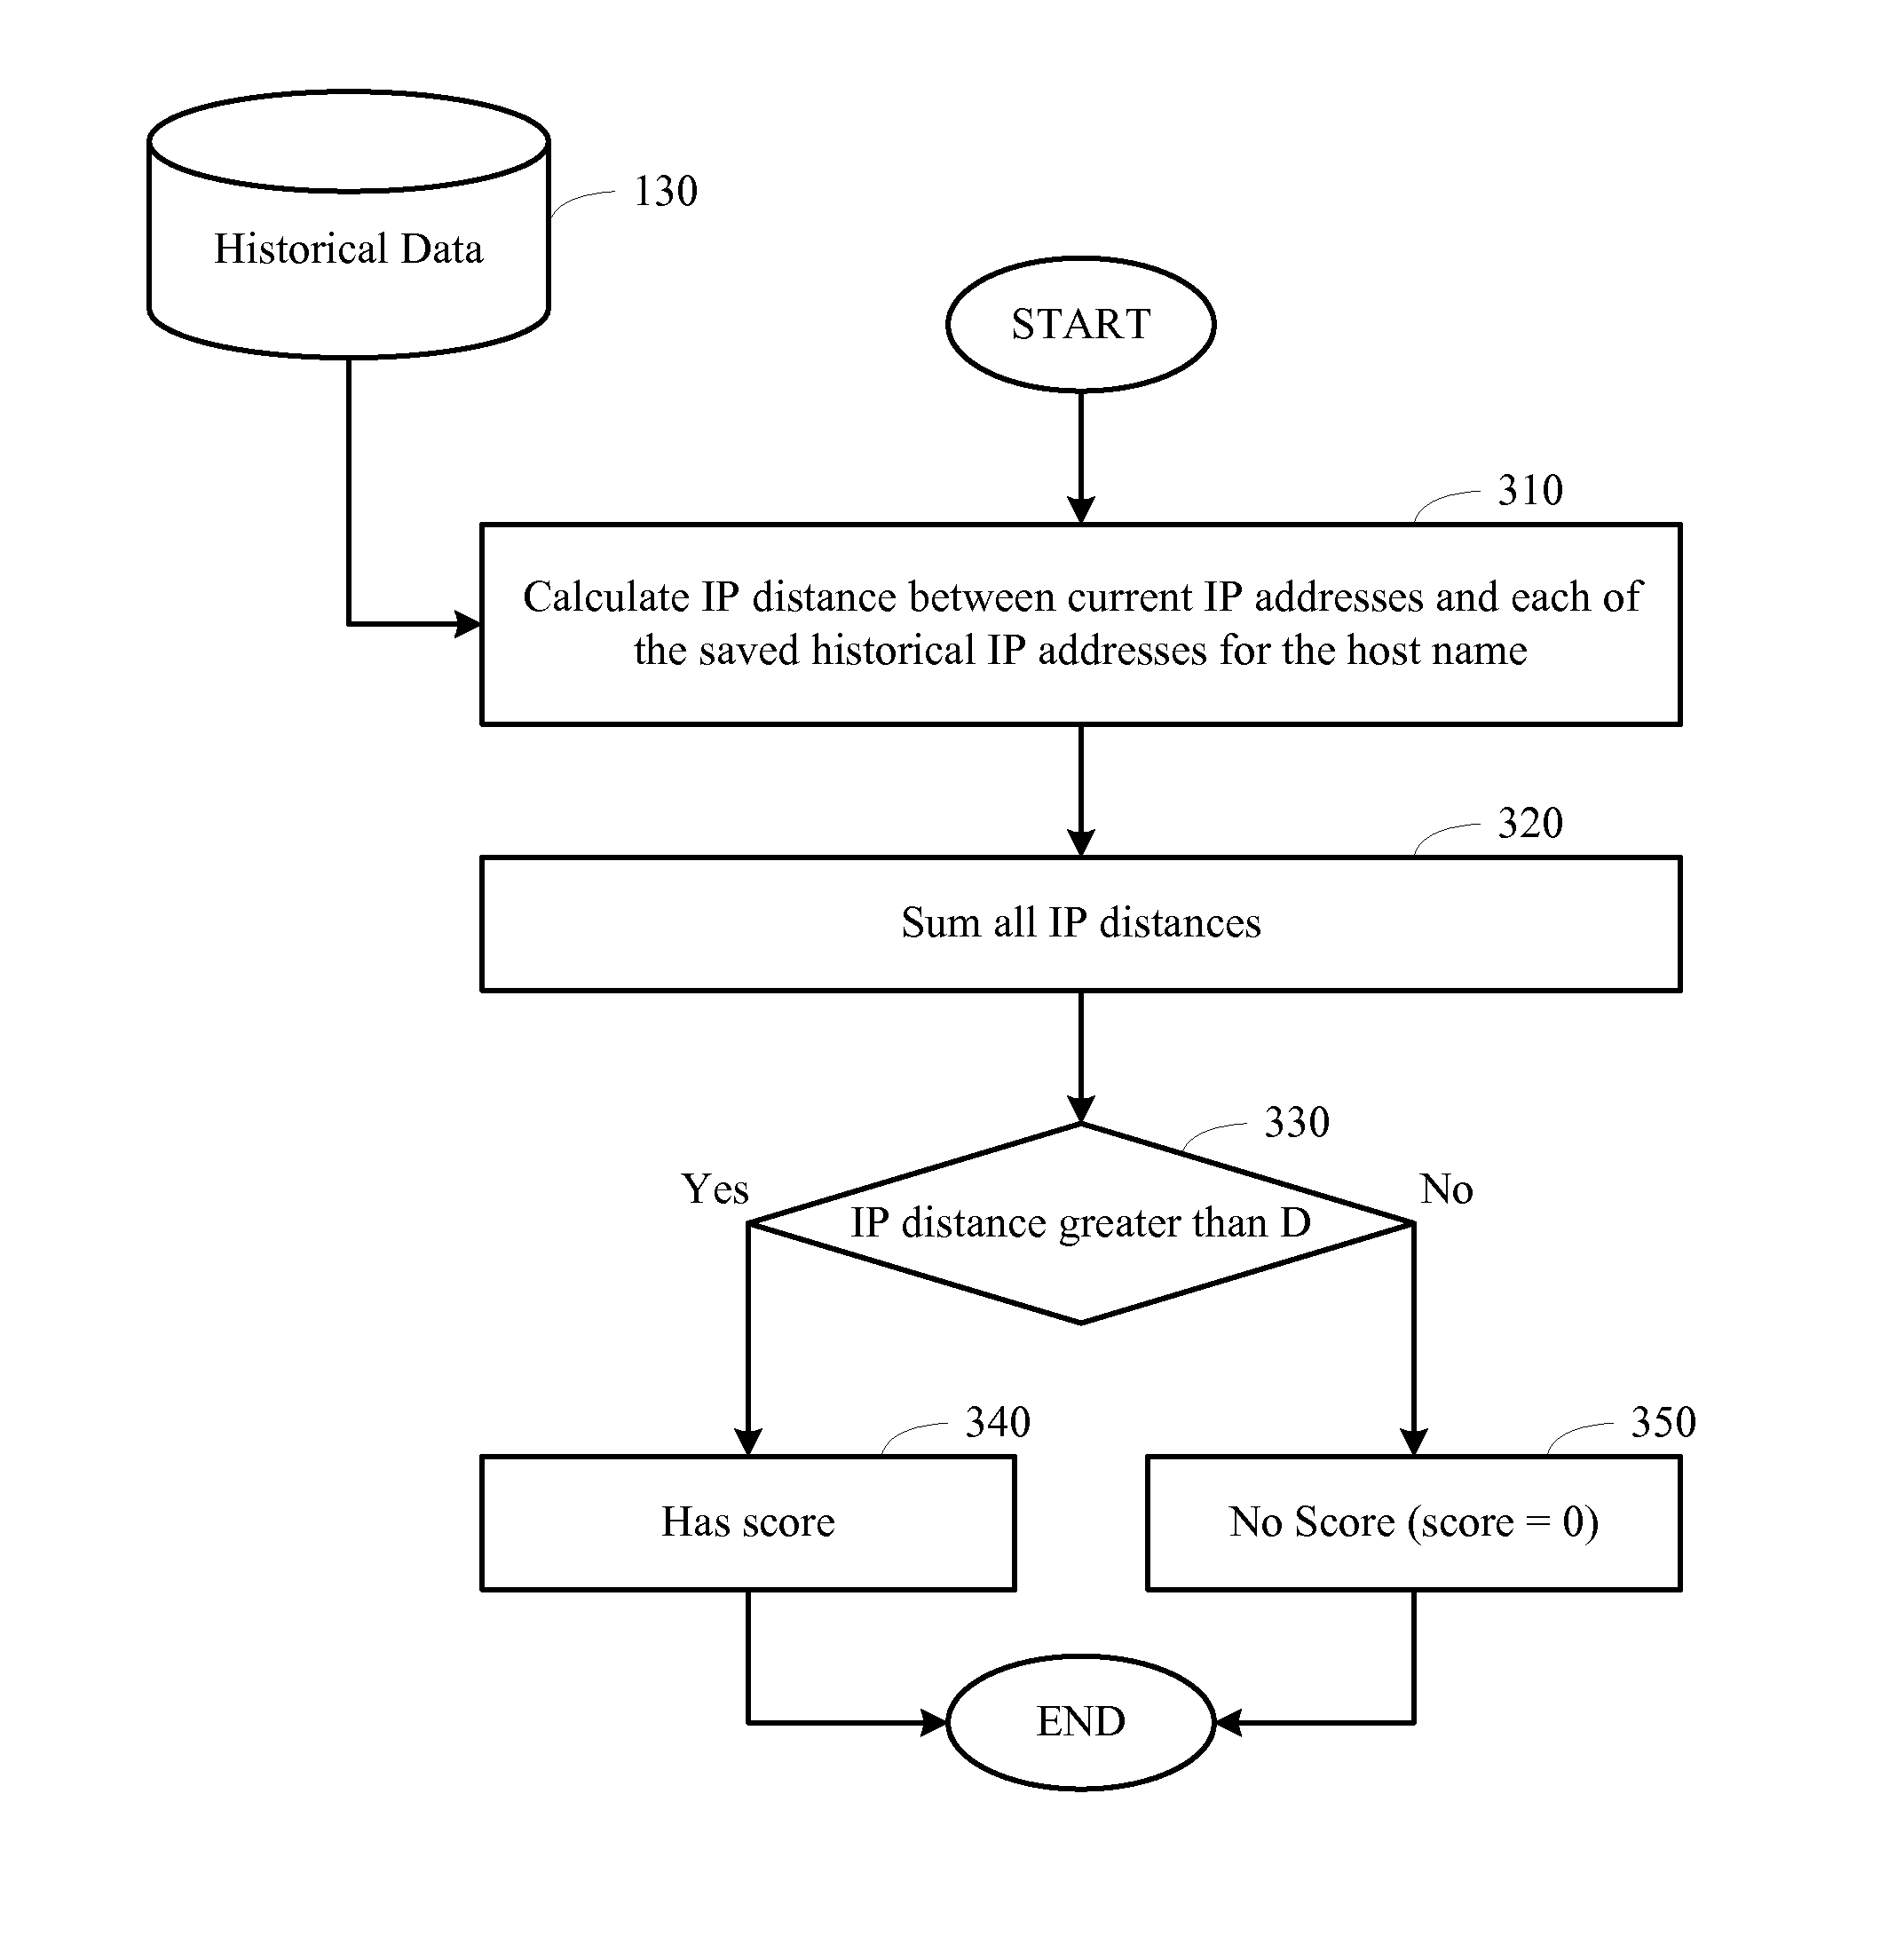 System for detecting change of name-to-IP resolution